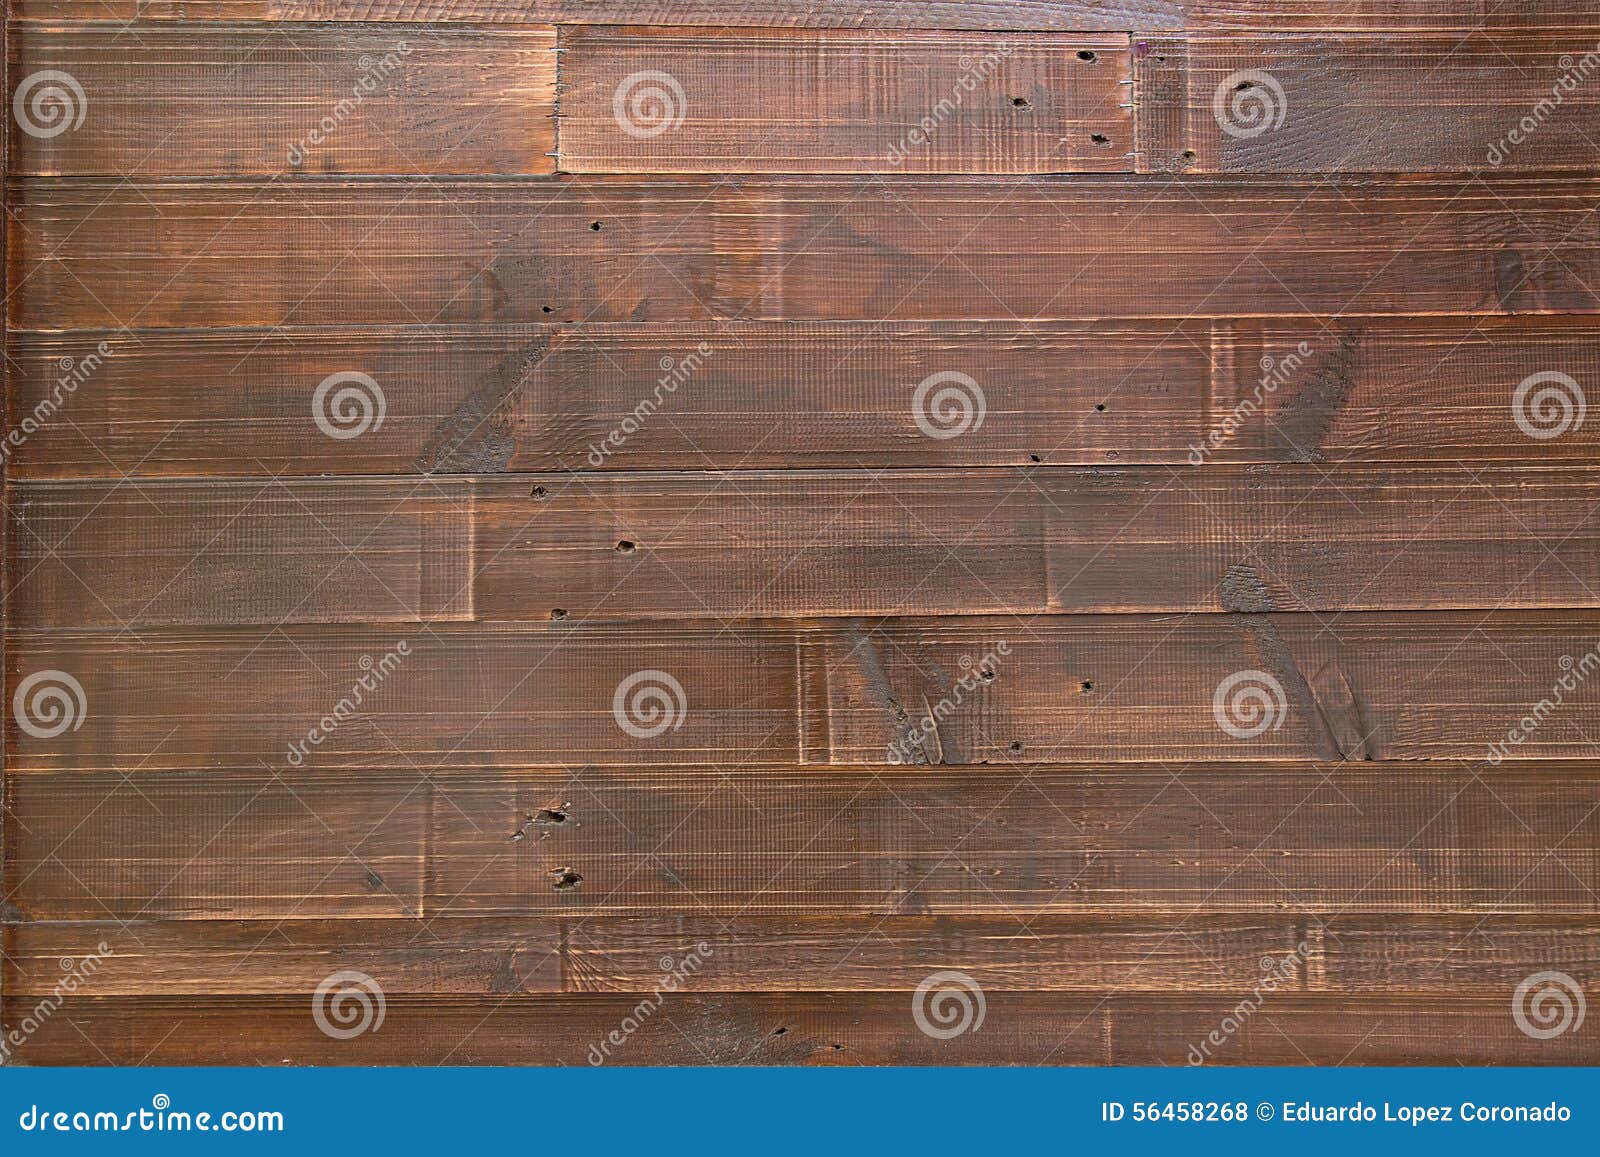 background and red wood texture